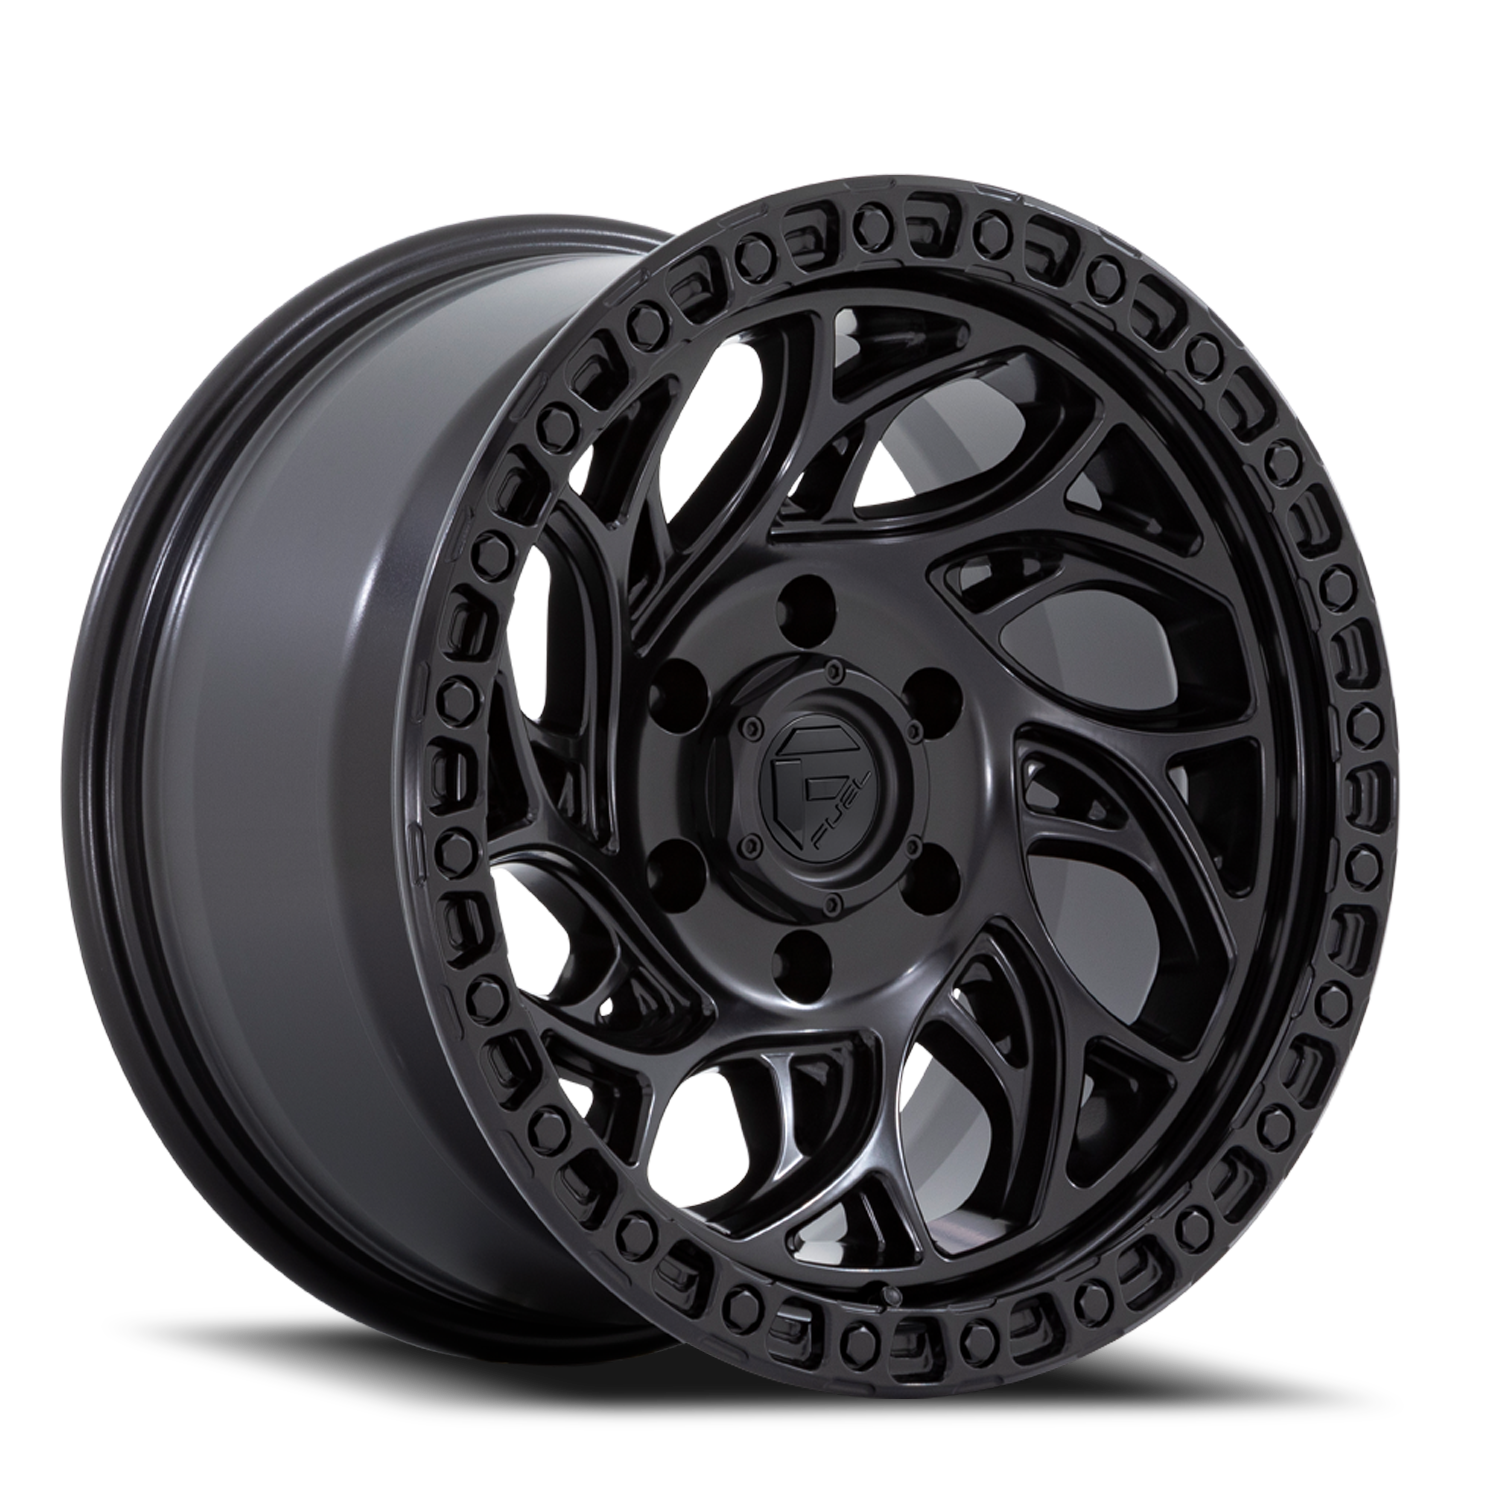 Aluminum Wheels 17X9 Runner OR D852 5 On 139.7 Blackout 78.1 Bore 1 Offset Fuel Off Road Wheels